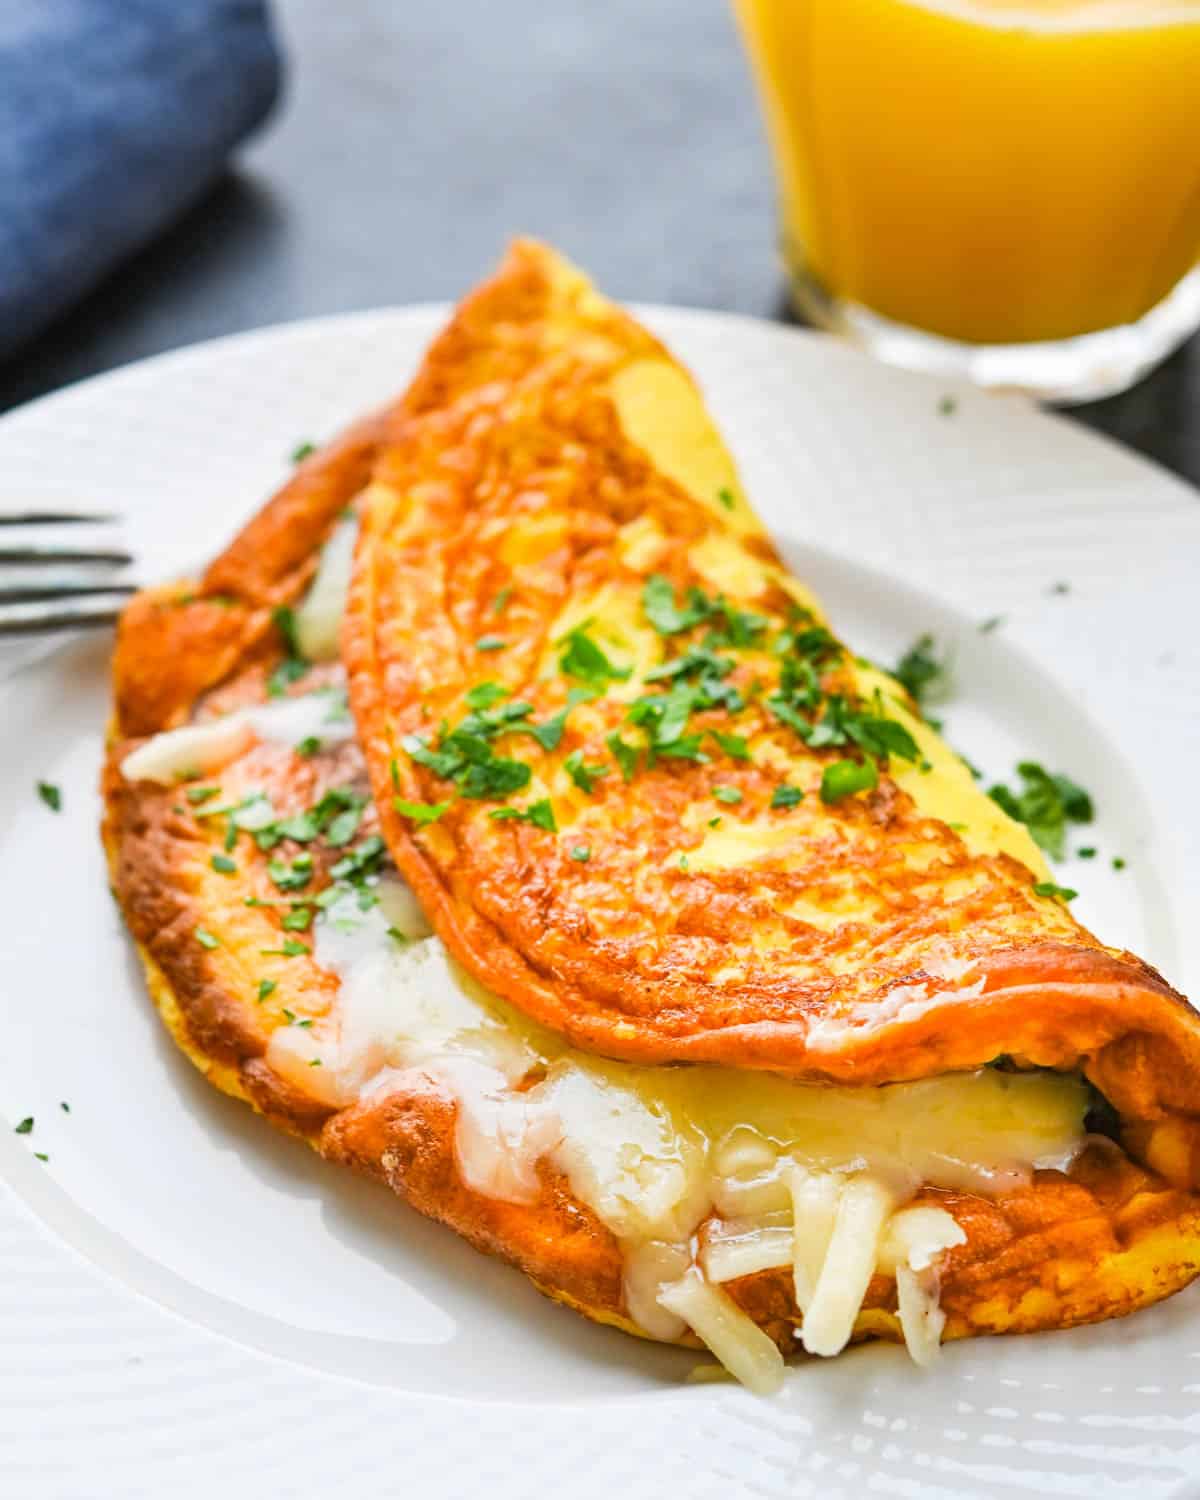 a puffy cheese omelette on a plate with parsley garnish.